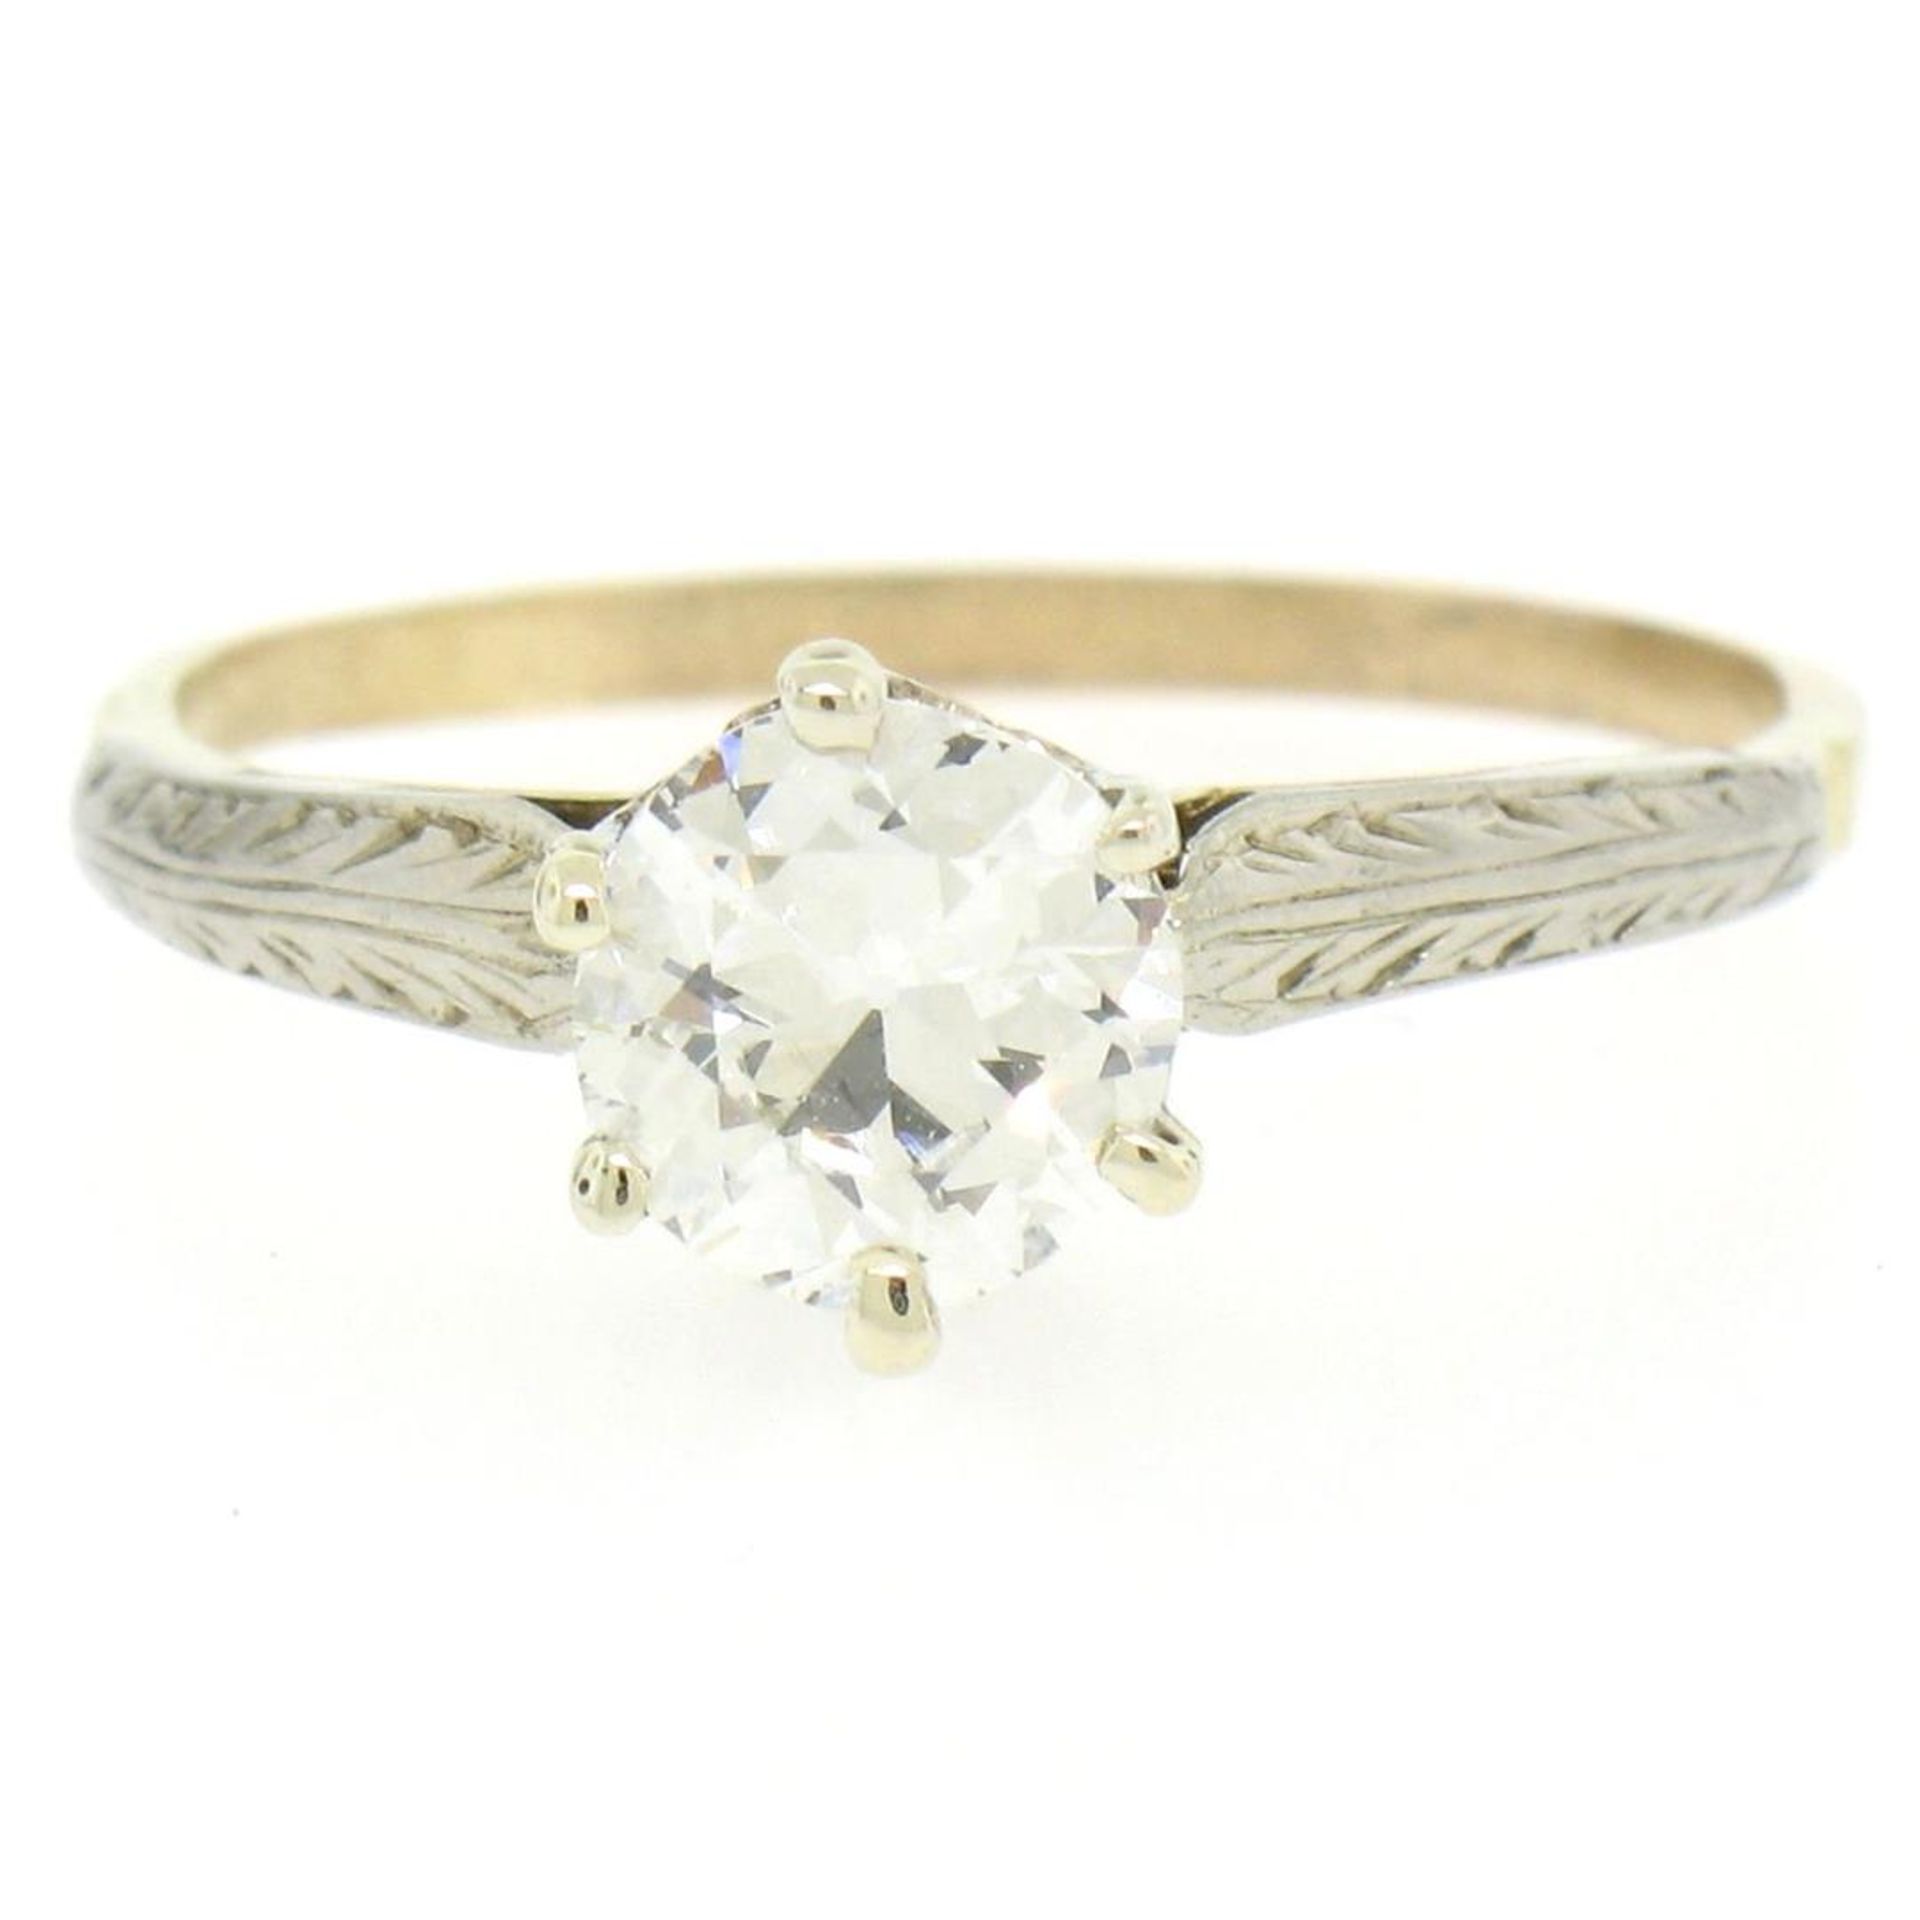 Etched 14k TT Gold .80 ct European Cut Diamond Solitaire Engagement Ring - Image 6 of 7